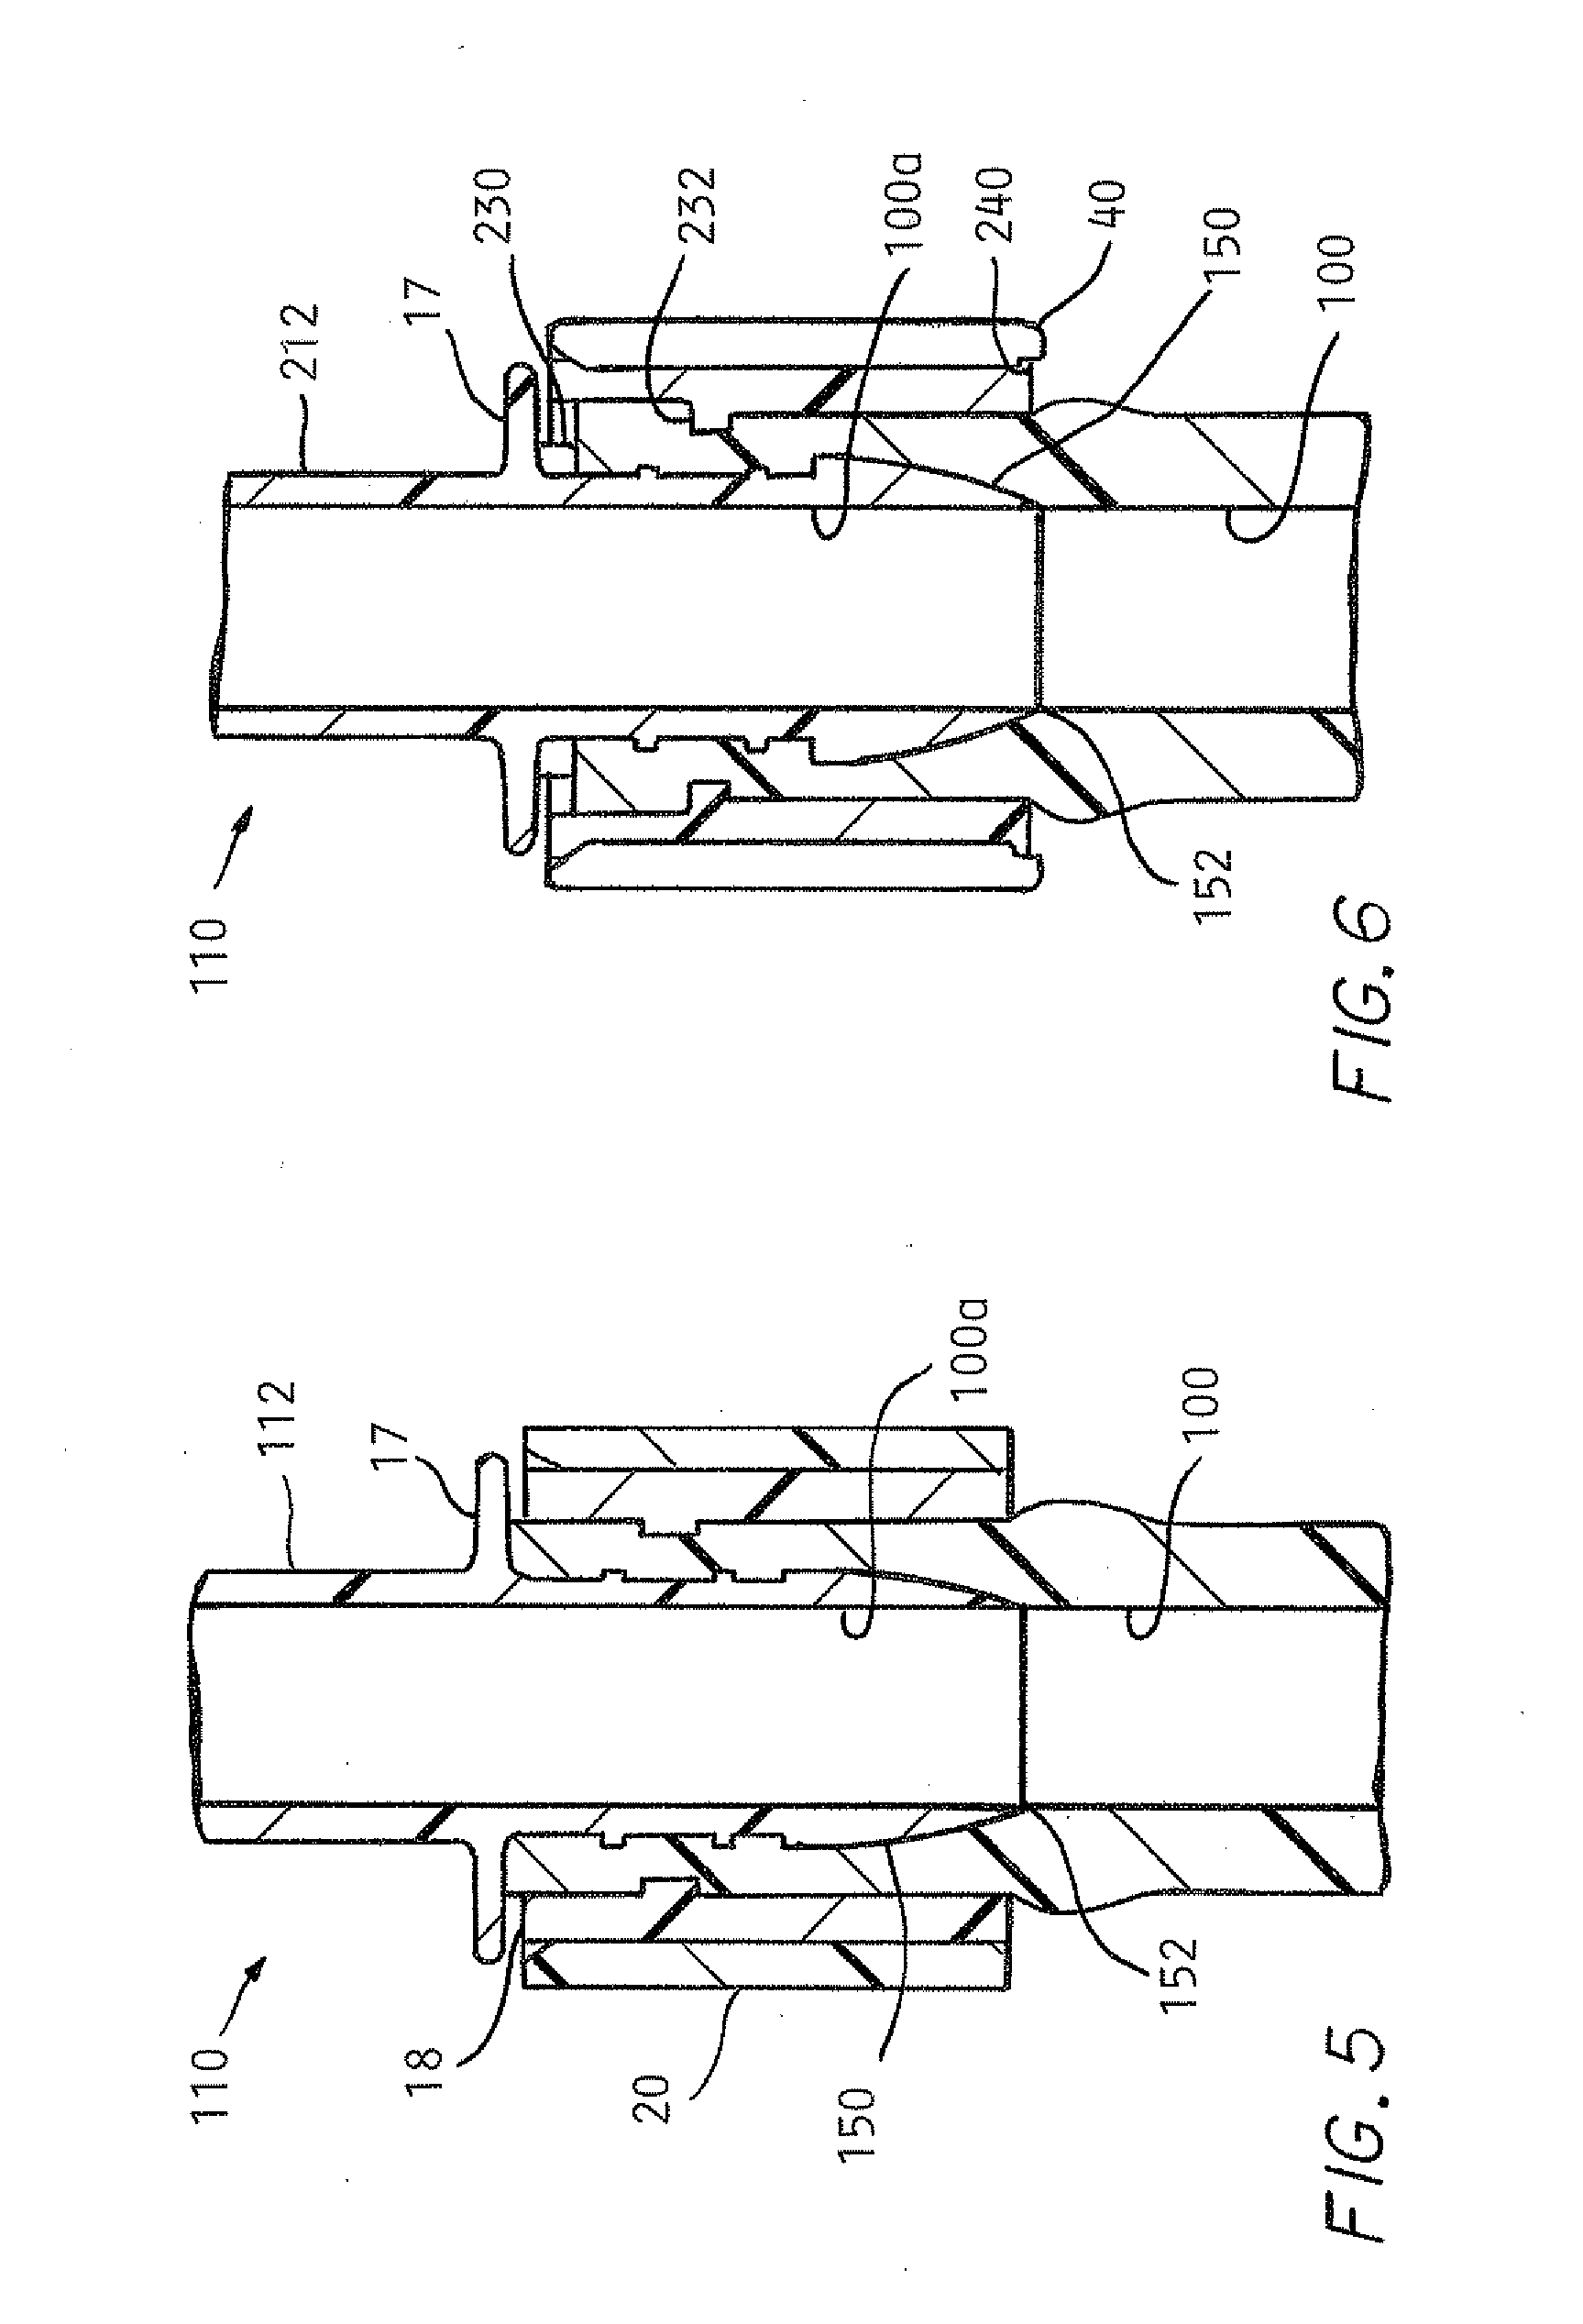 Barb clamp with smooth bore